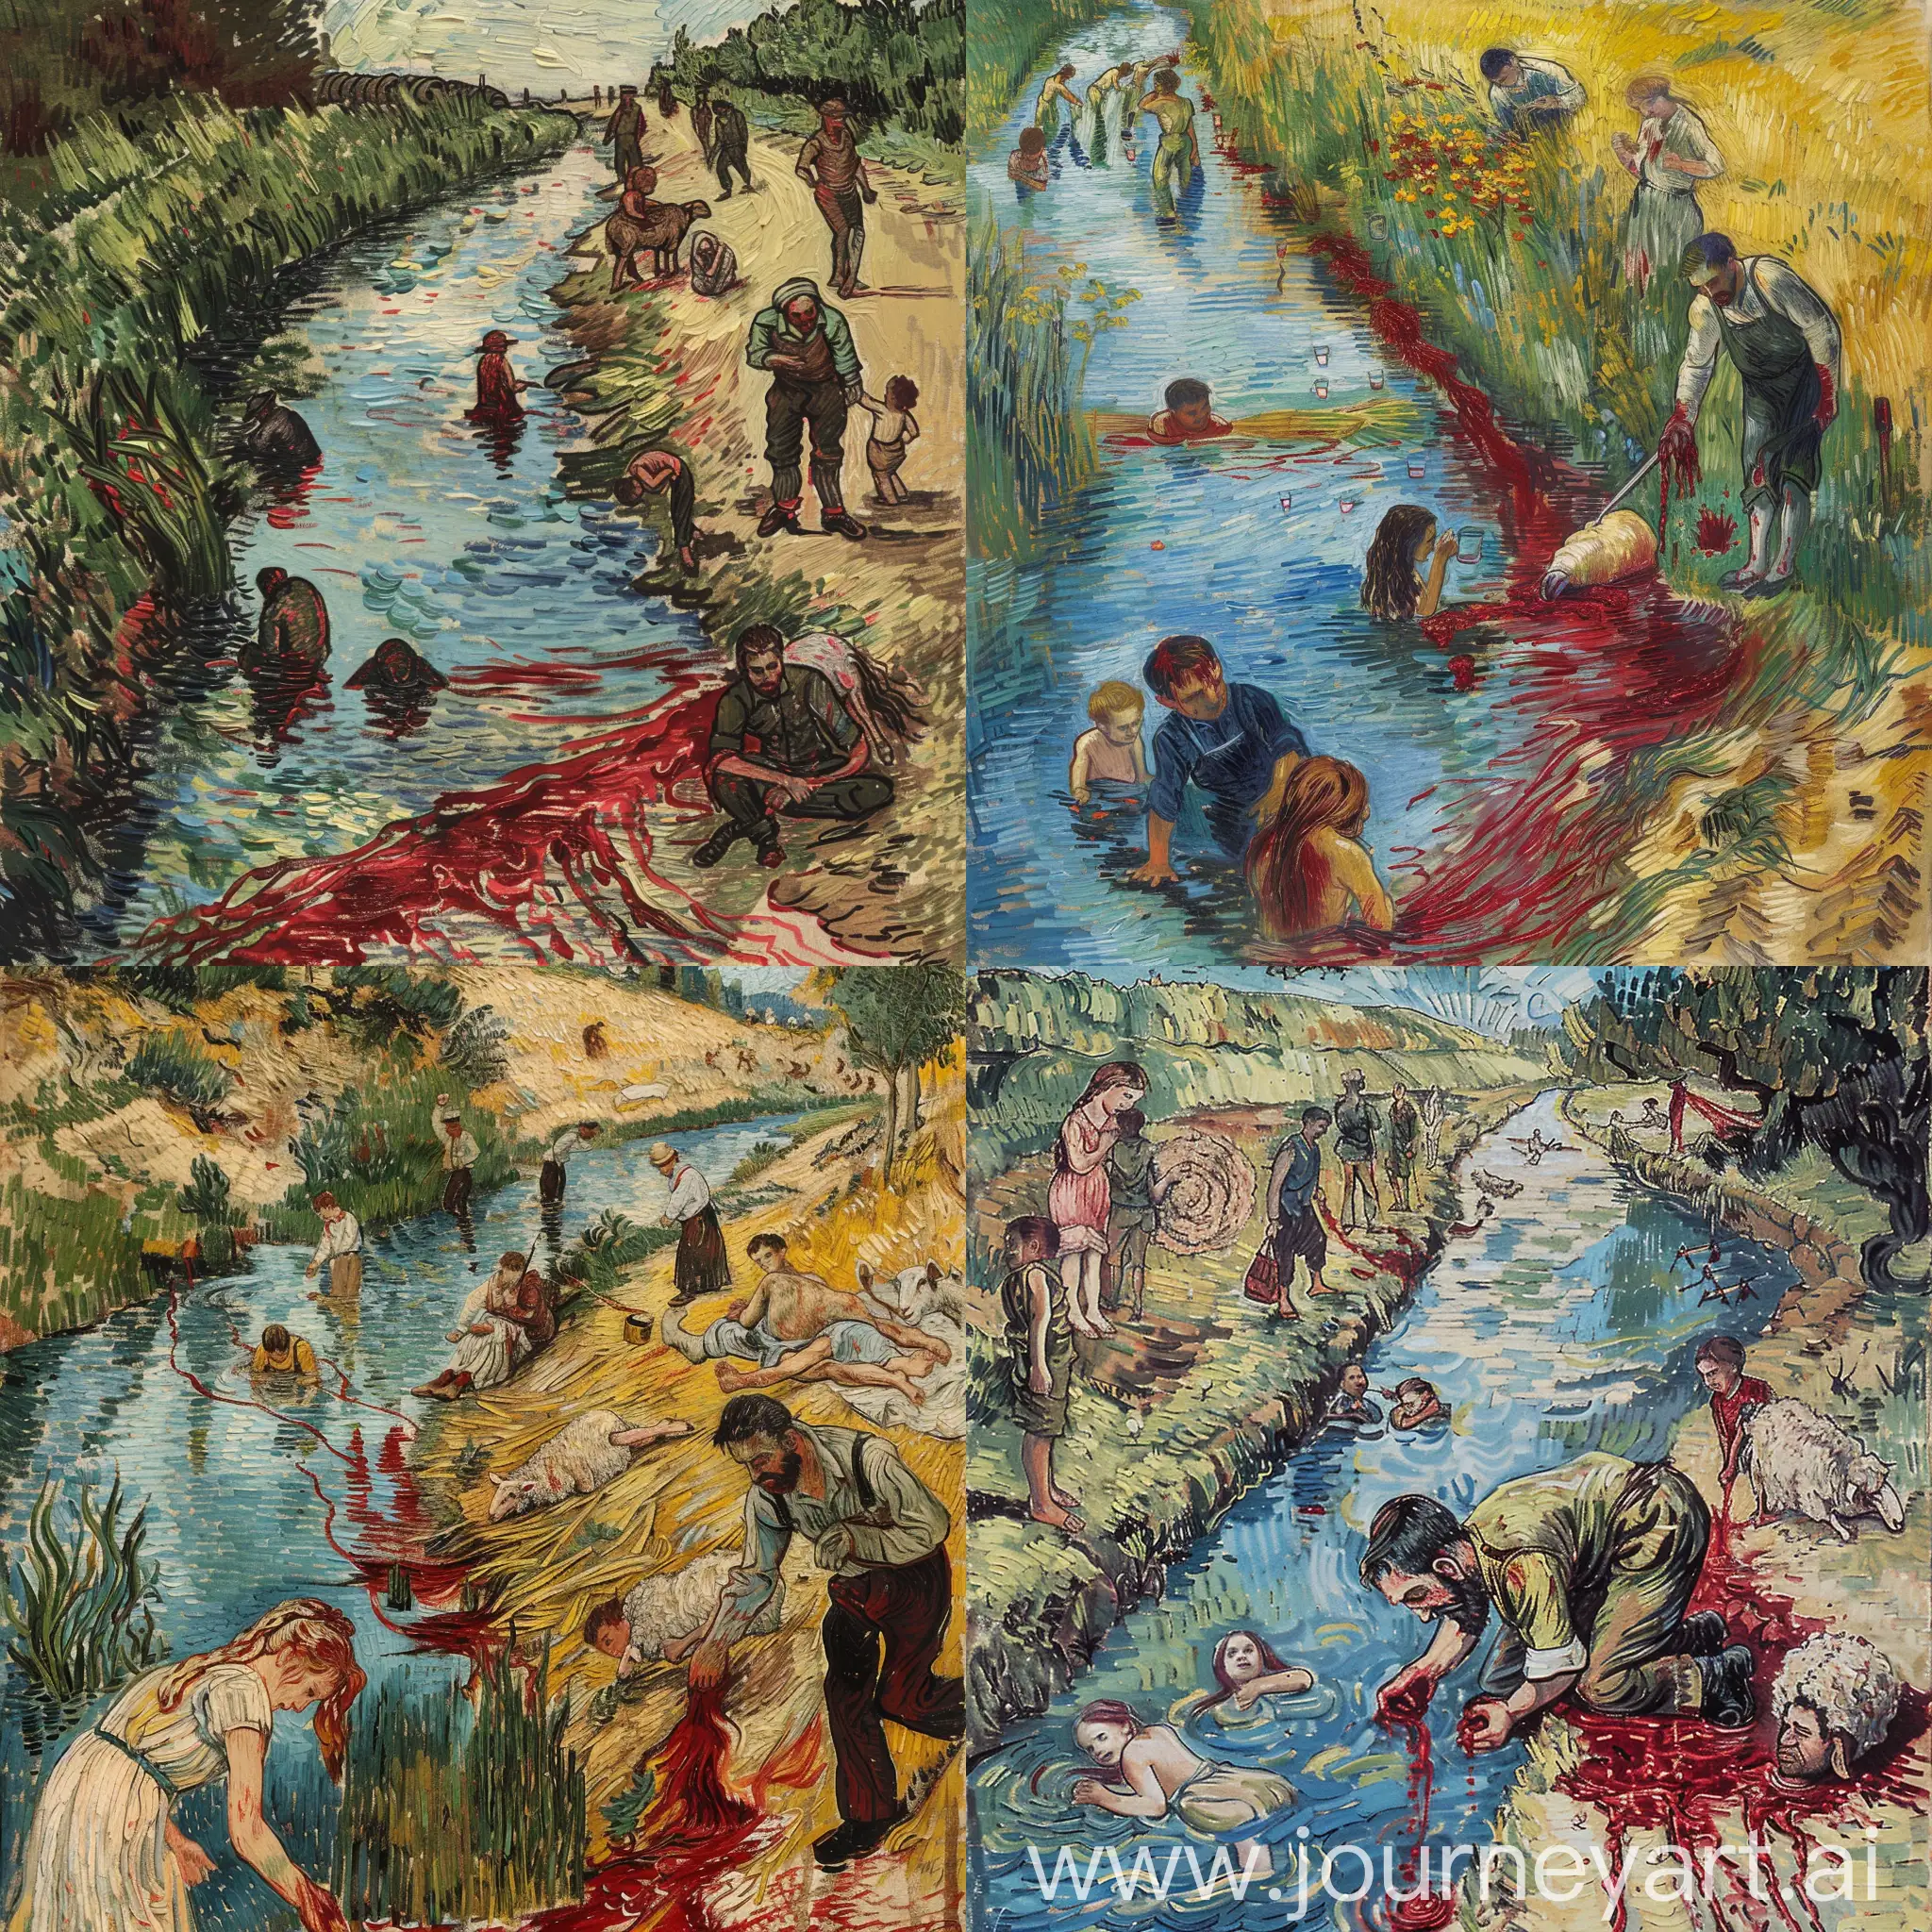 Eid-alAdha-Celebration-by-the-River-Van-Goghs-Inspired-Scene-with-Slaughtering-Reflection-and-Leisure